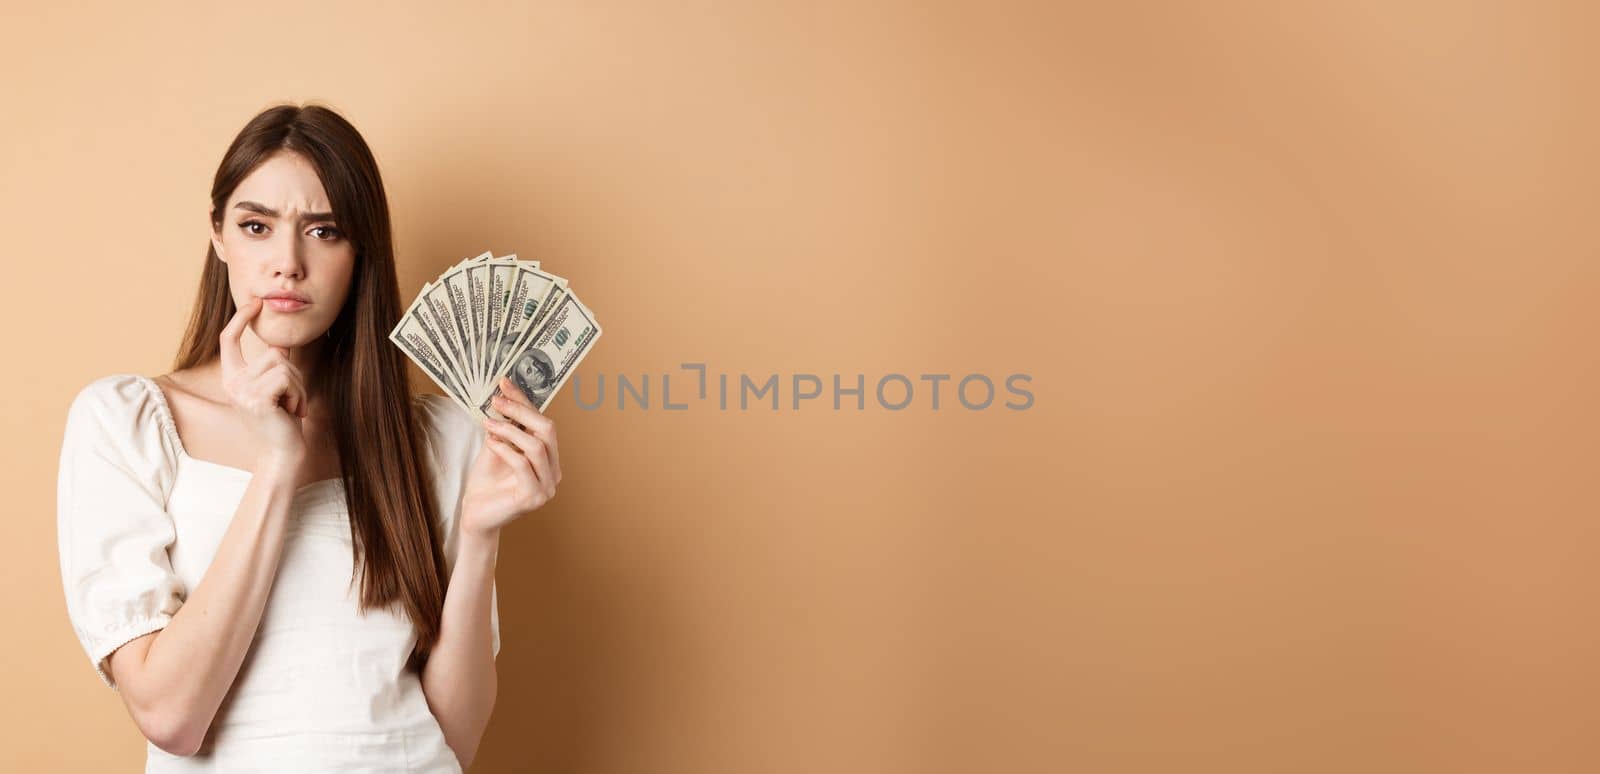 Pensive serious girl holding money and thinking, looking thoughtful at camera and frowning, deciding what to buy with dollar bills, beige background.